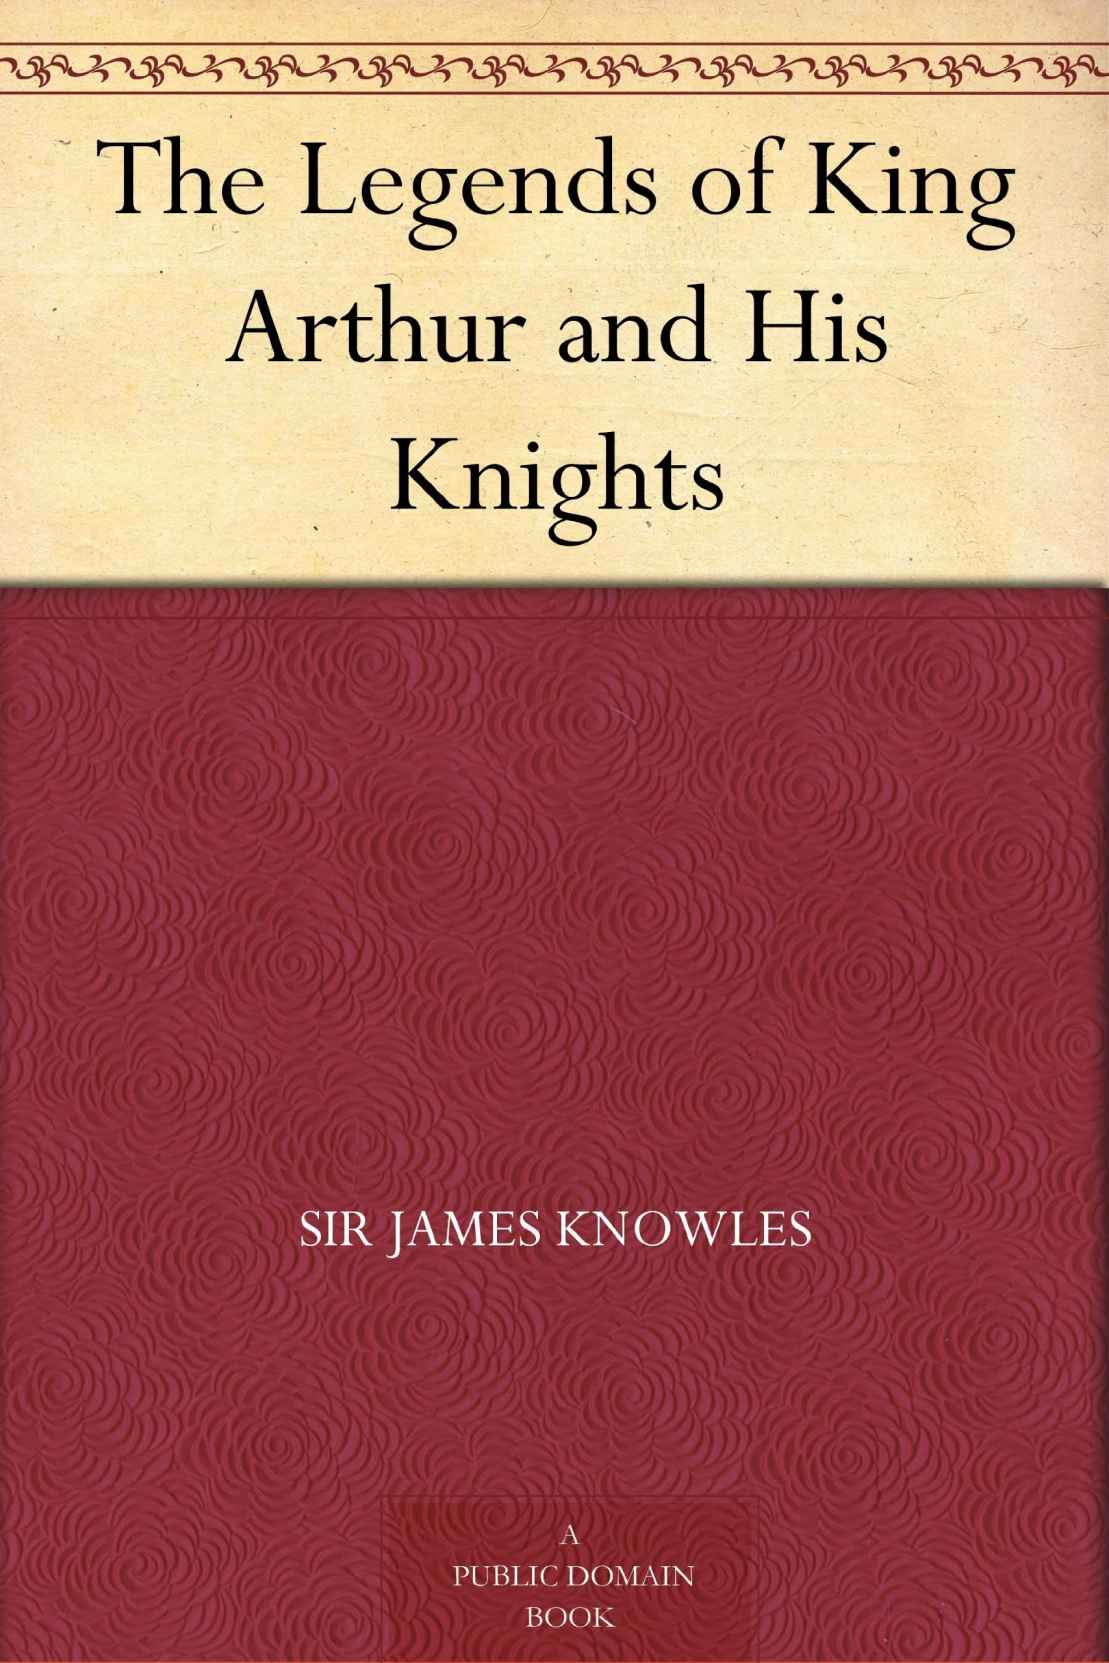 The Legends of King Arthur and His Knights Sir James Knowles 亚瑟王和他的骑士的传说【英语版】